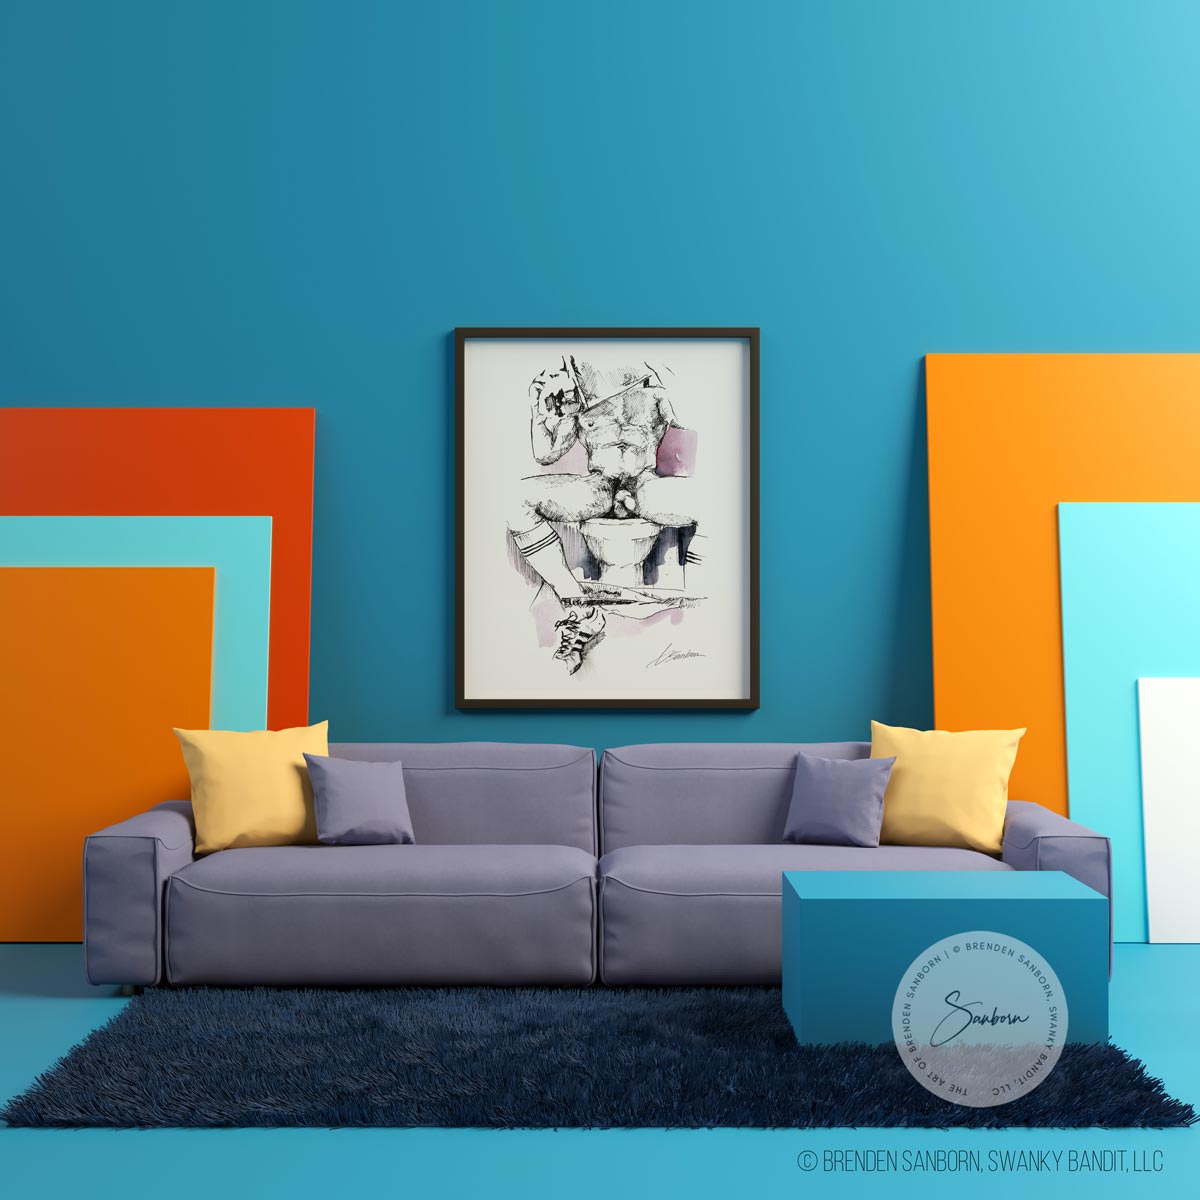 Tranquil Male Nude Painting: Watercolor and Ink Depiction of a Man Reading in the Bathroom - Full Nude - Giclee Art Print